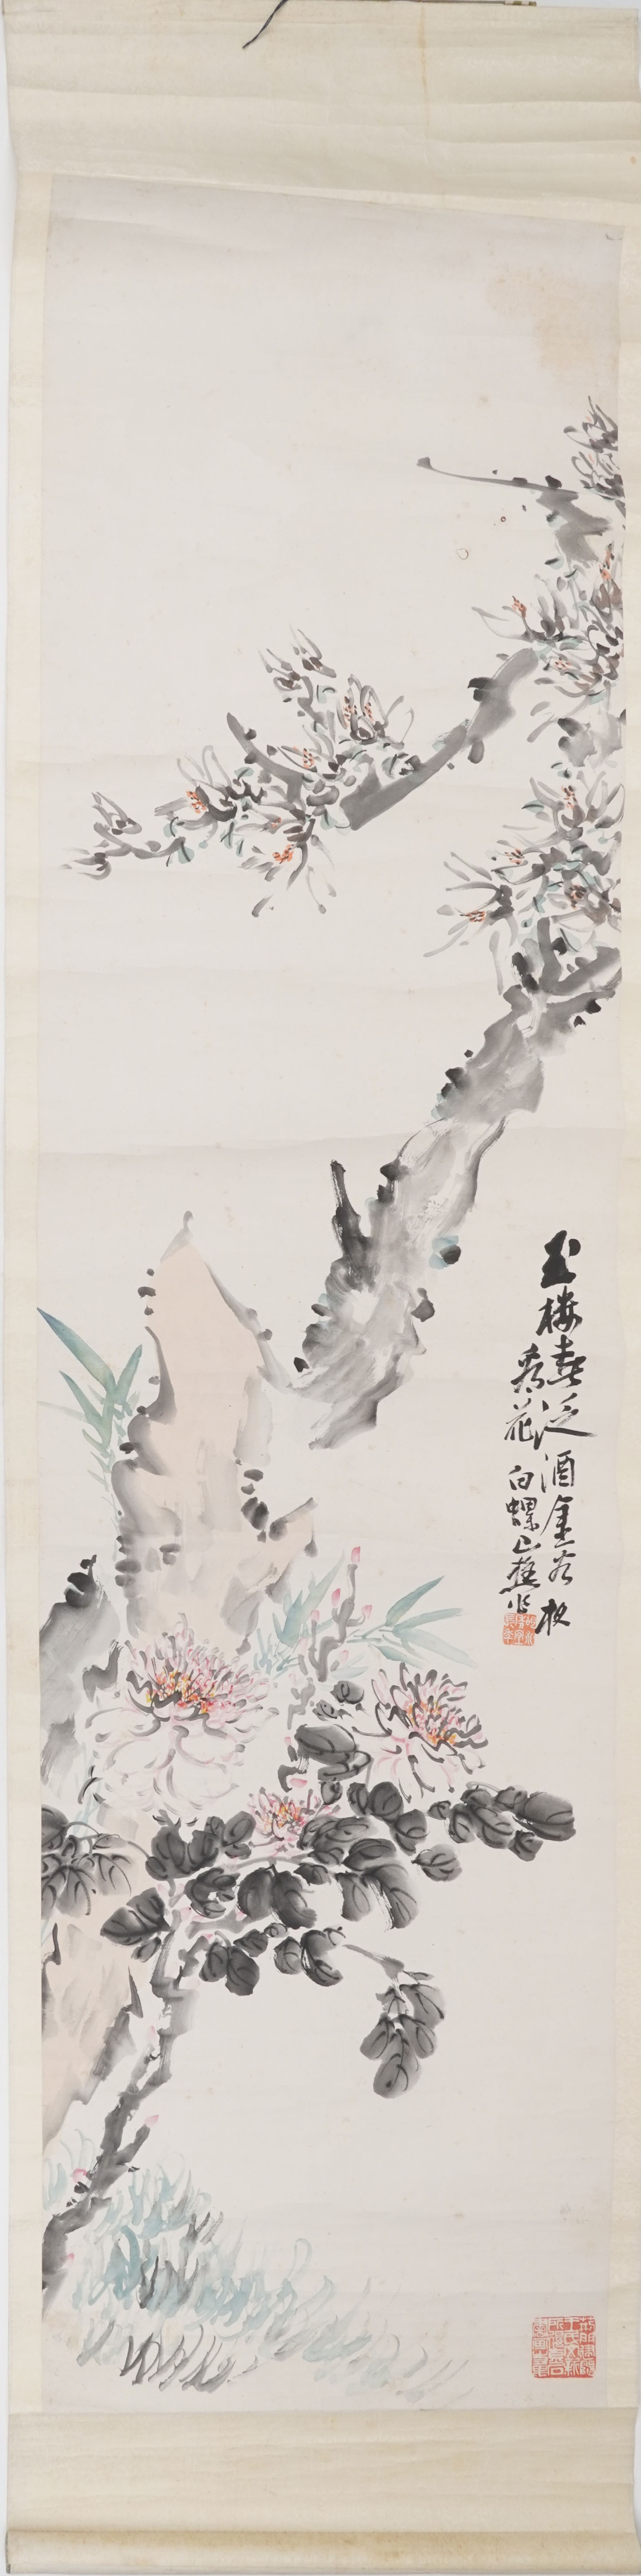 Chinese wall hanging scroll hand painted with blossoming trees, 175cm x 46cm - Image 4 of 12